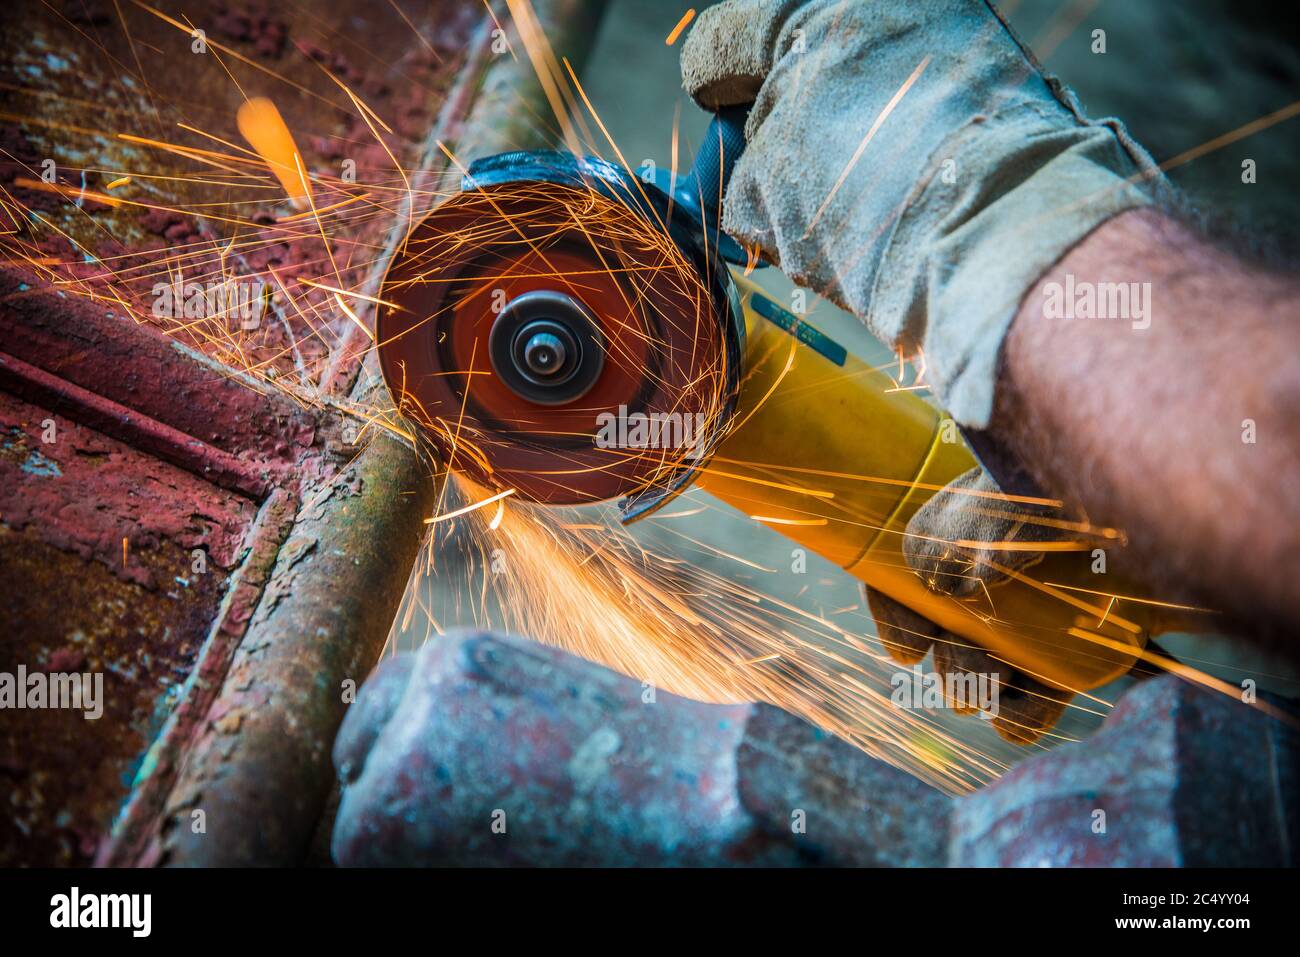 Worker cutting metal with electric wheel grinder in factory. Sparks while grinding iron. Close up view Stock Photo